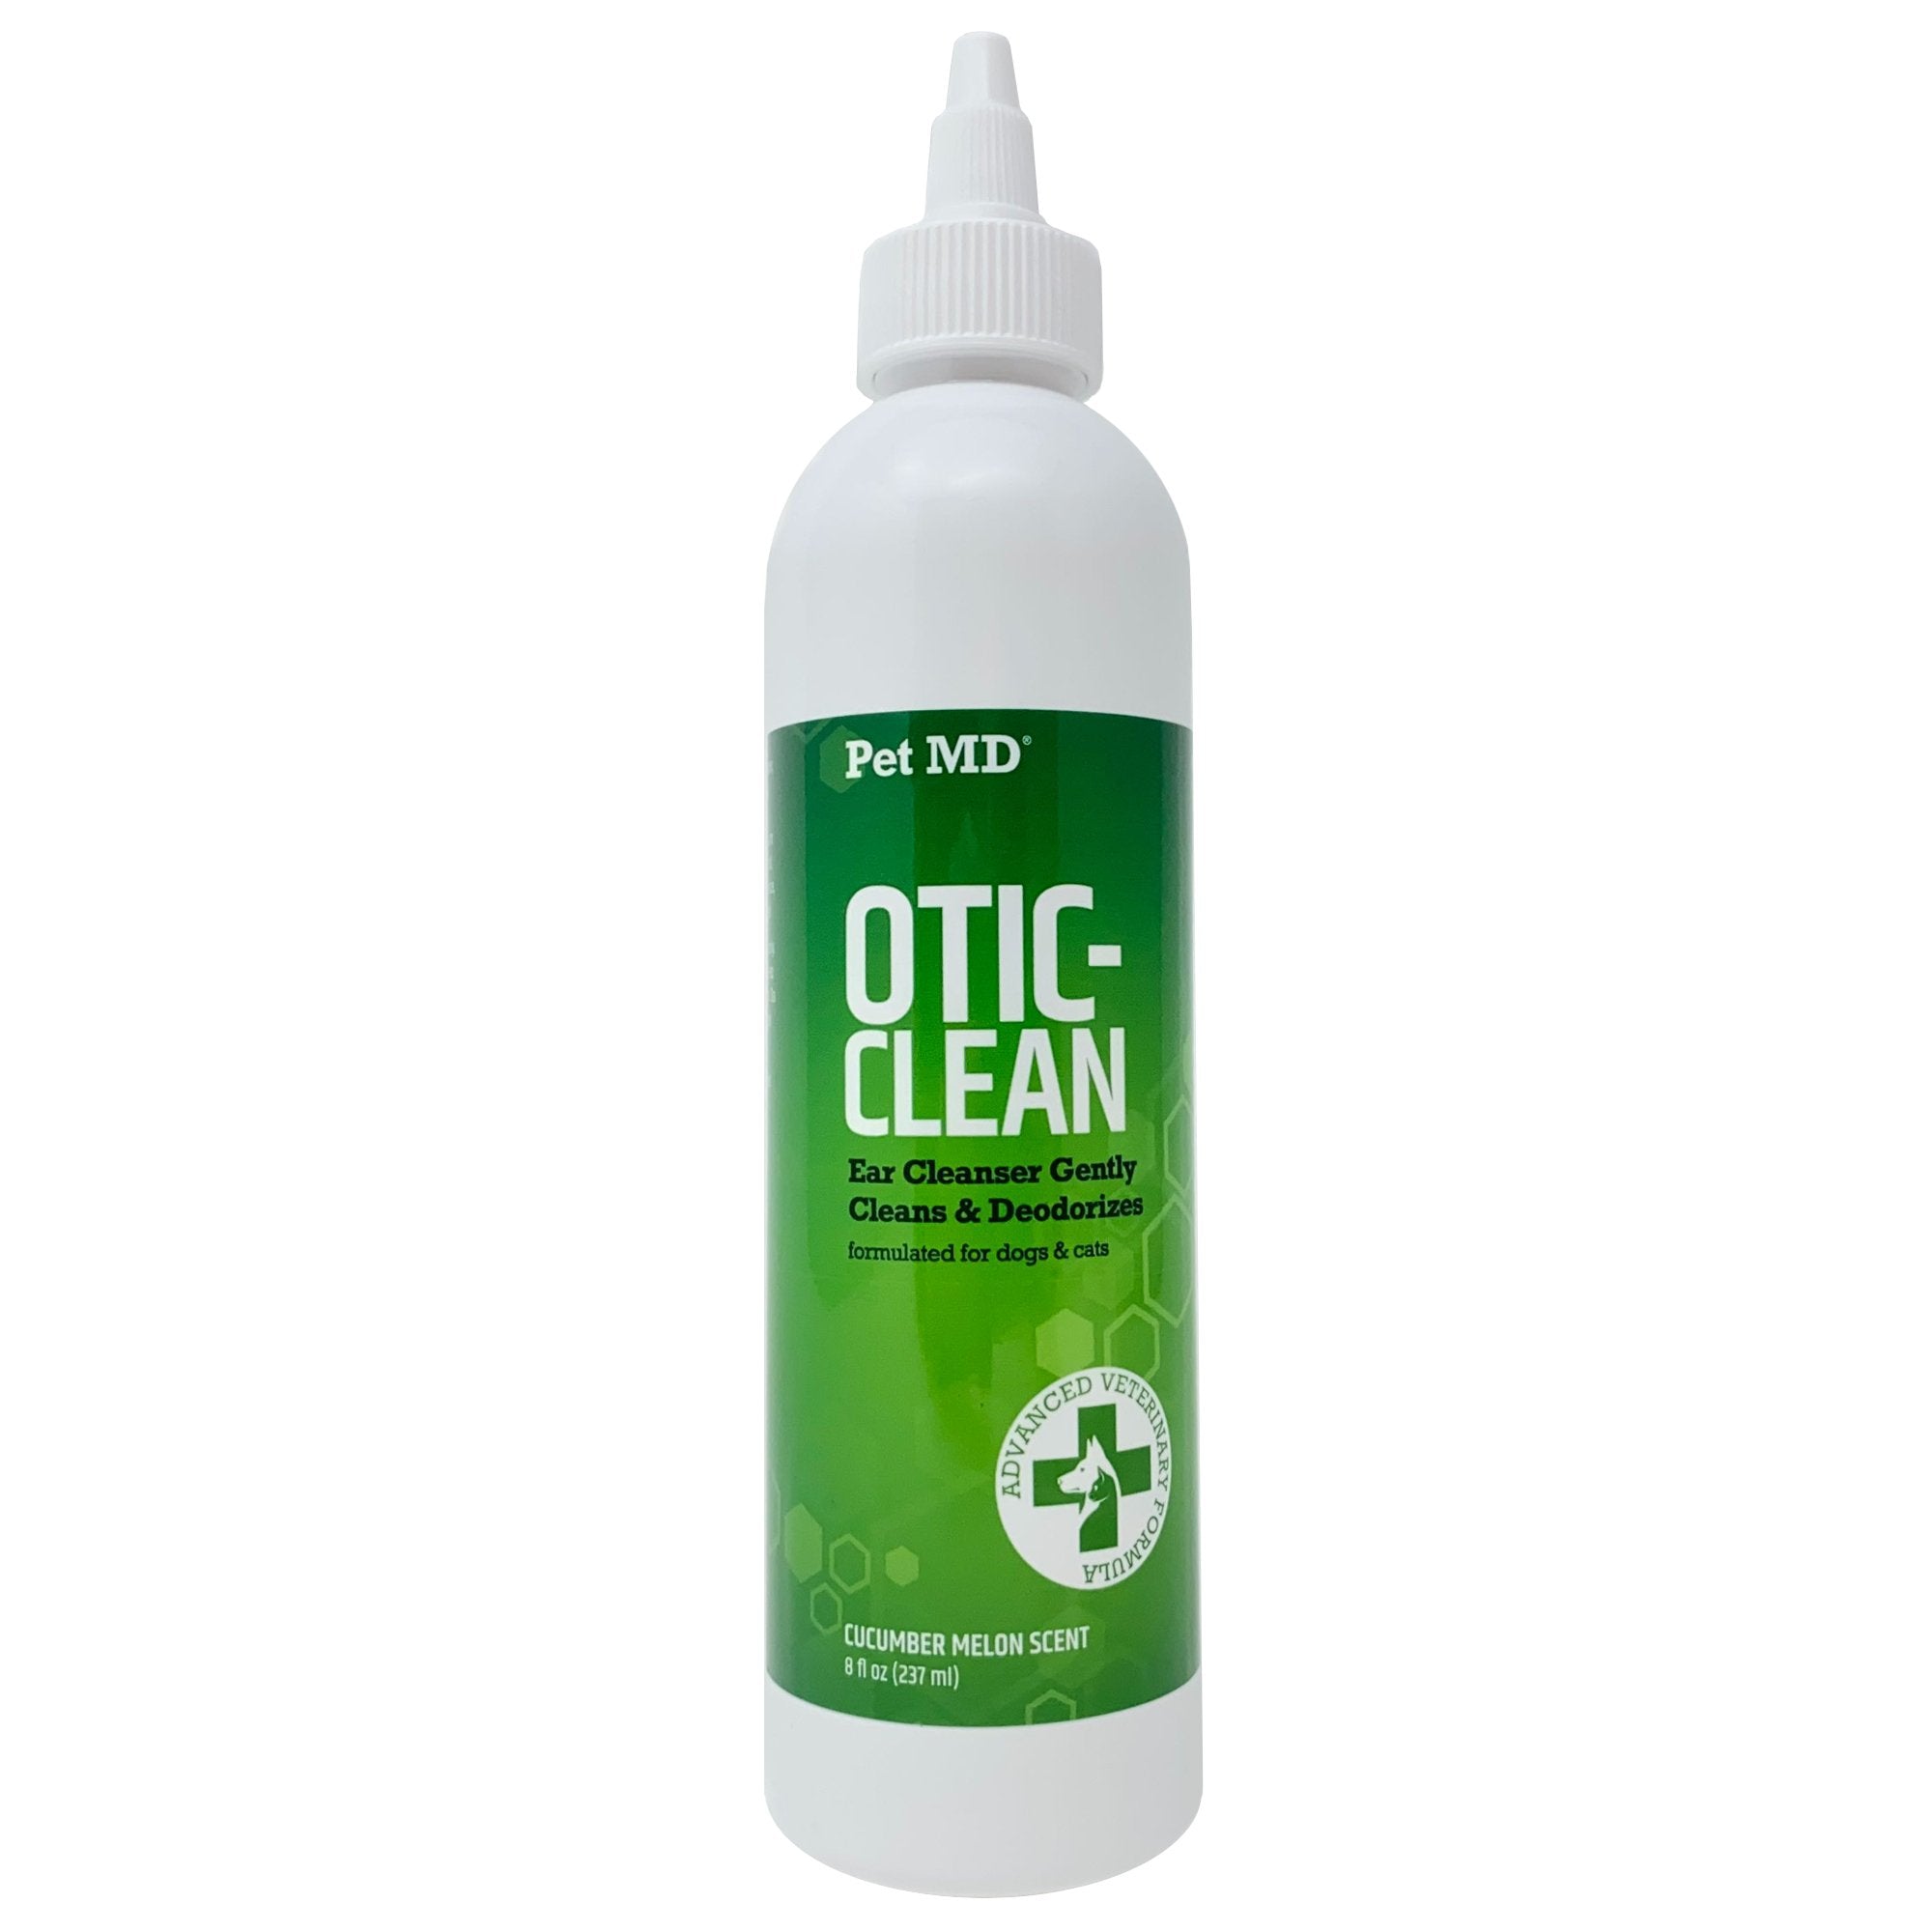 Otic-Clean Ear Cleaner for Dogs & Cats, 8 oz